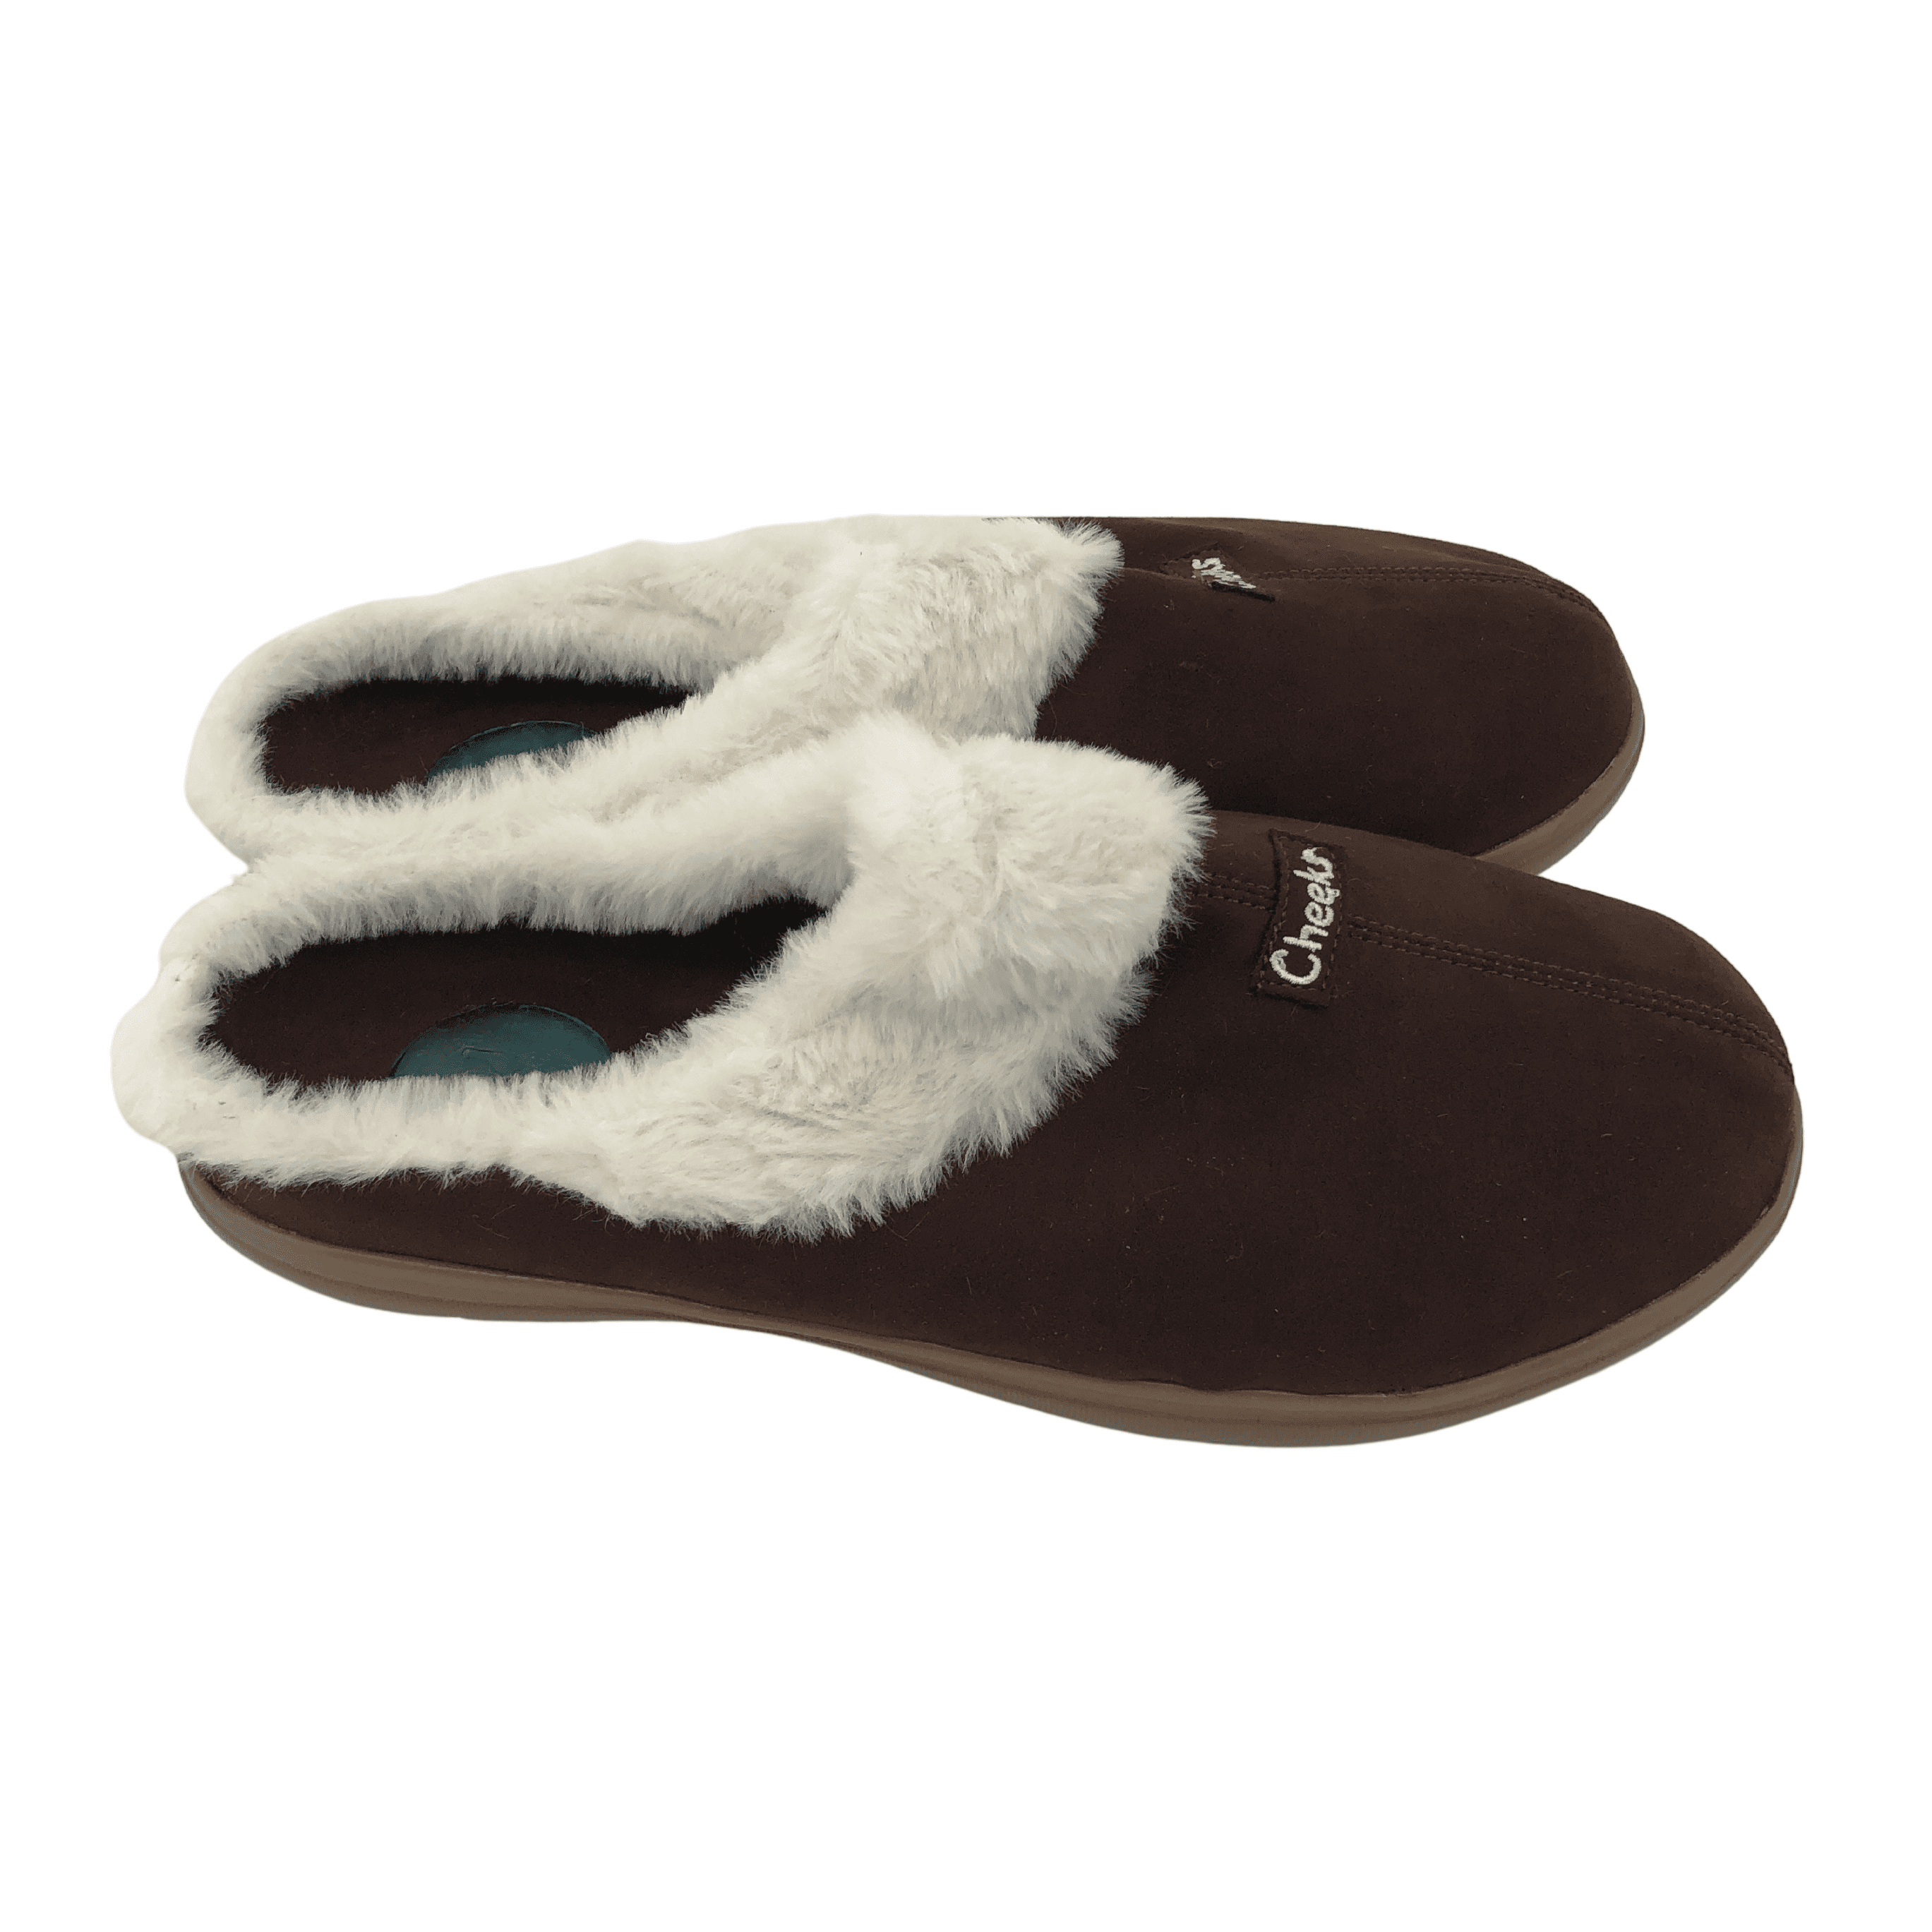 Tony little cheeks fit body slippers in size 10W colour Chocolate